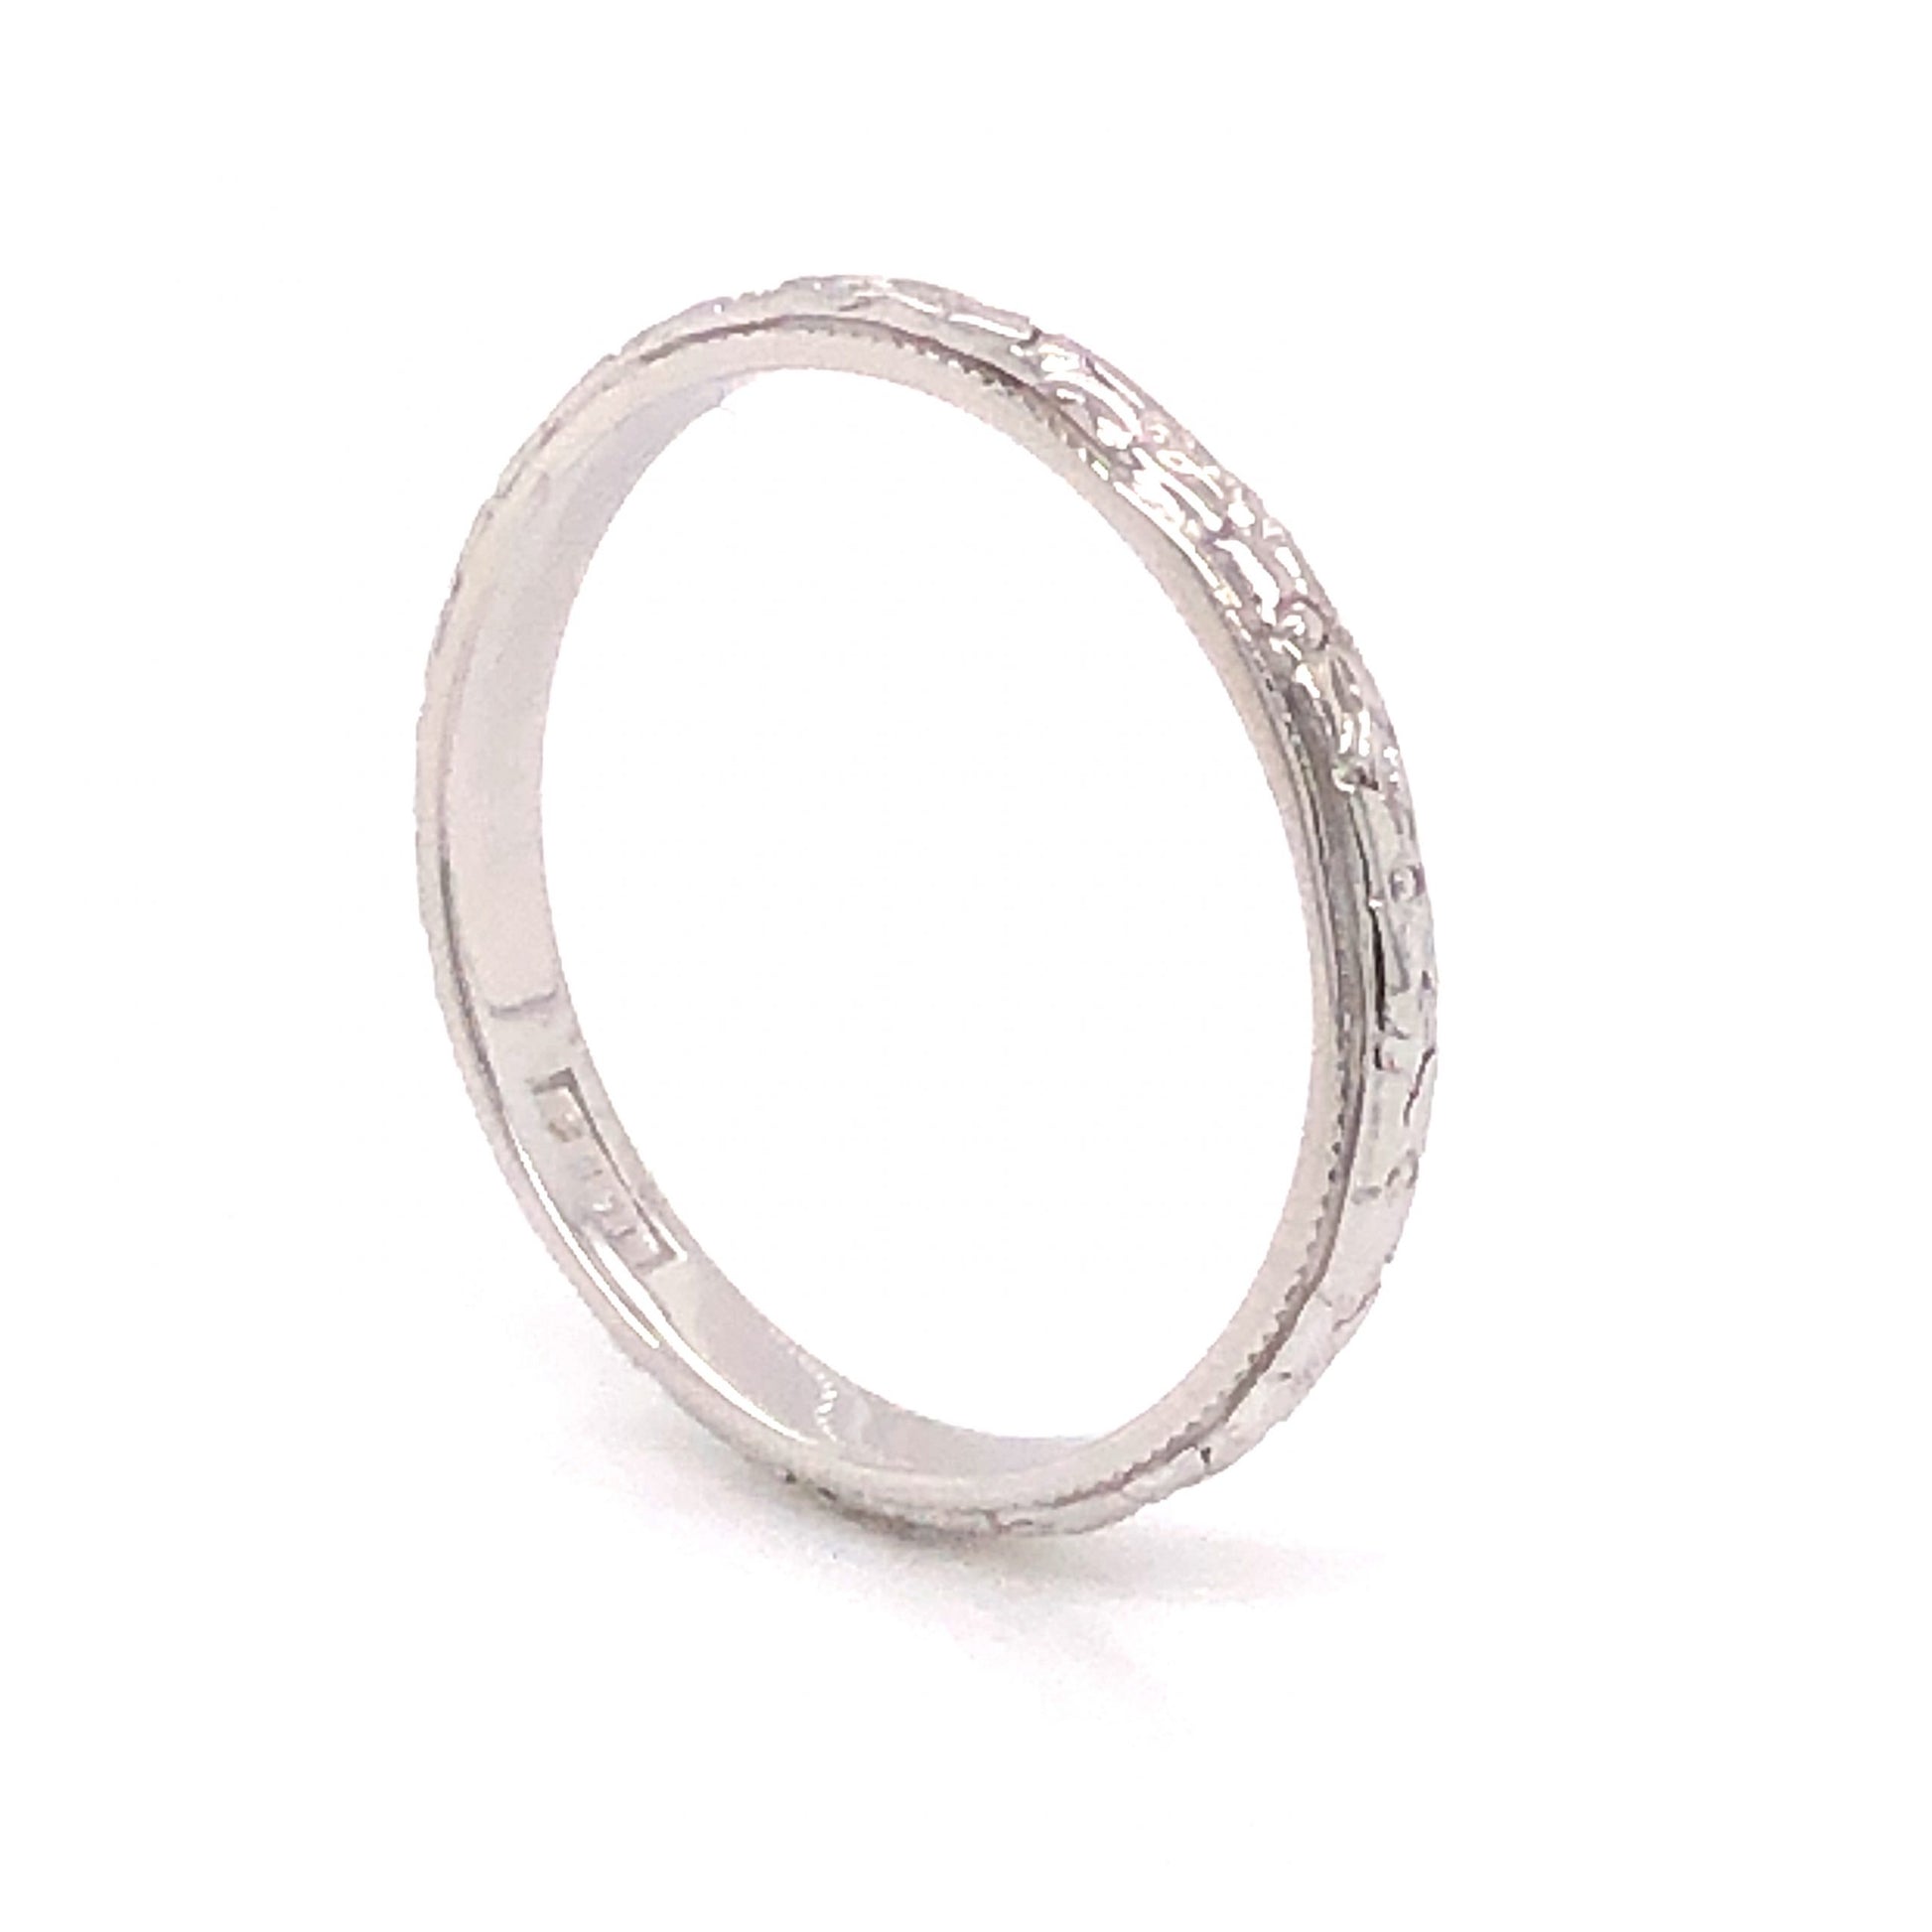 2.5mm Engraved Art Deco Wedding Band in 18k White Gold